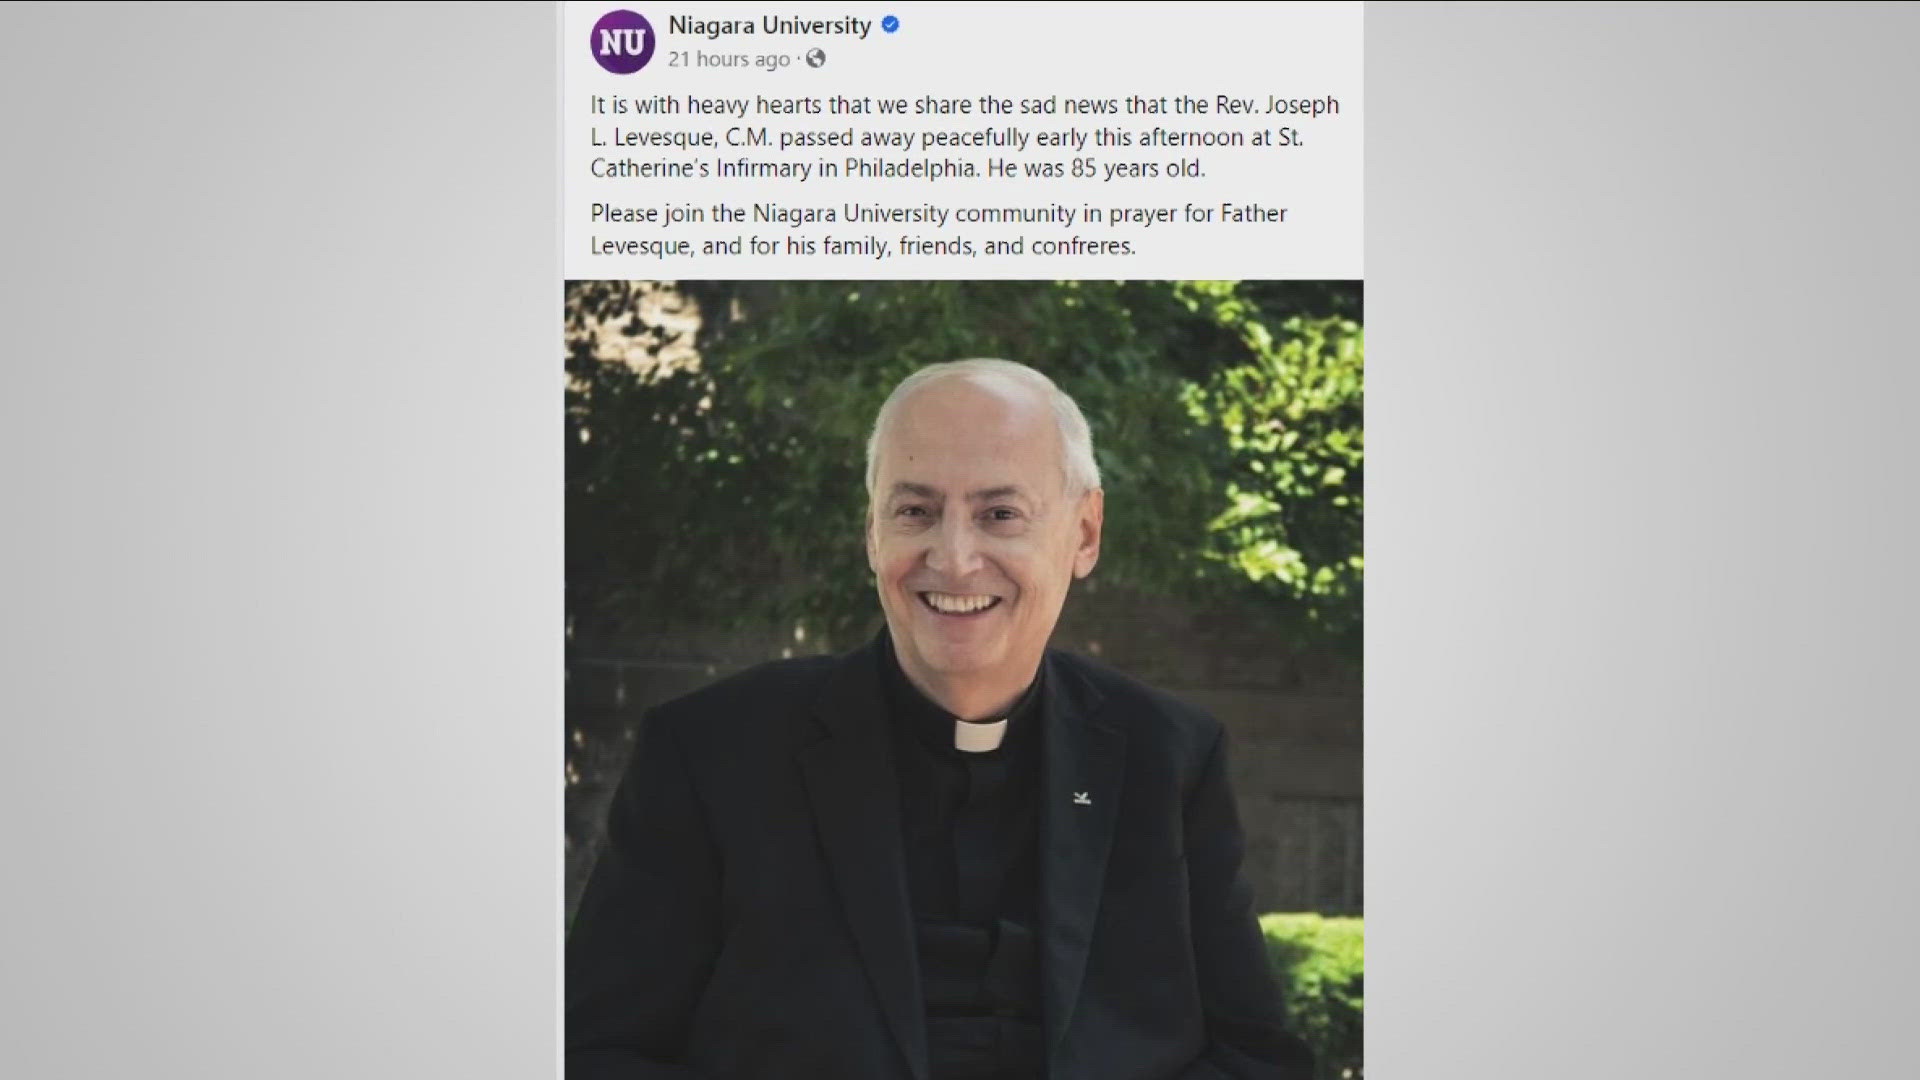 Father Joseph Levesque has died. He began as a faculty member at NU in the 1970's. He was 85 years old